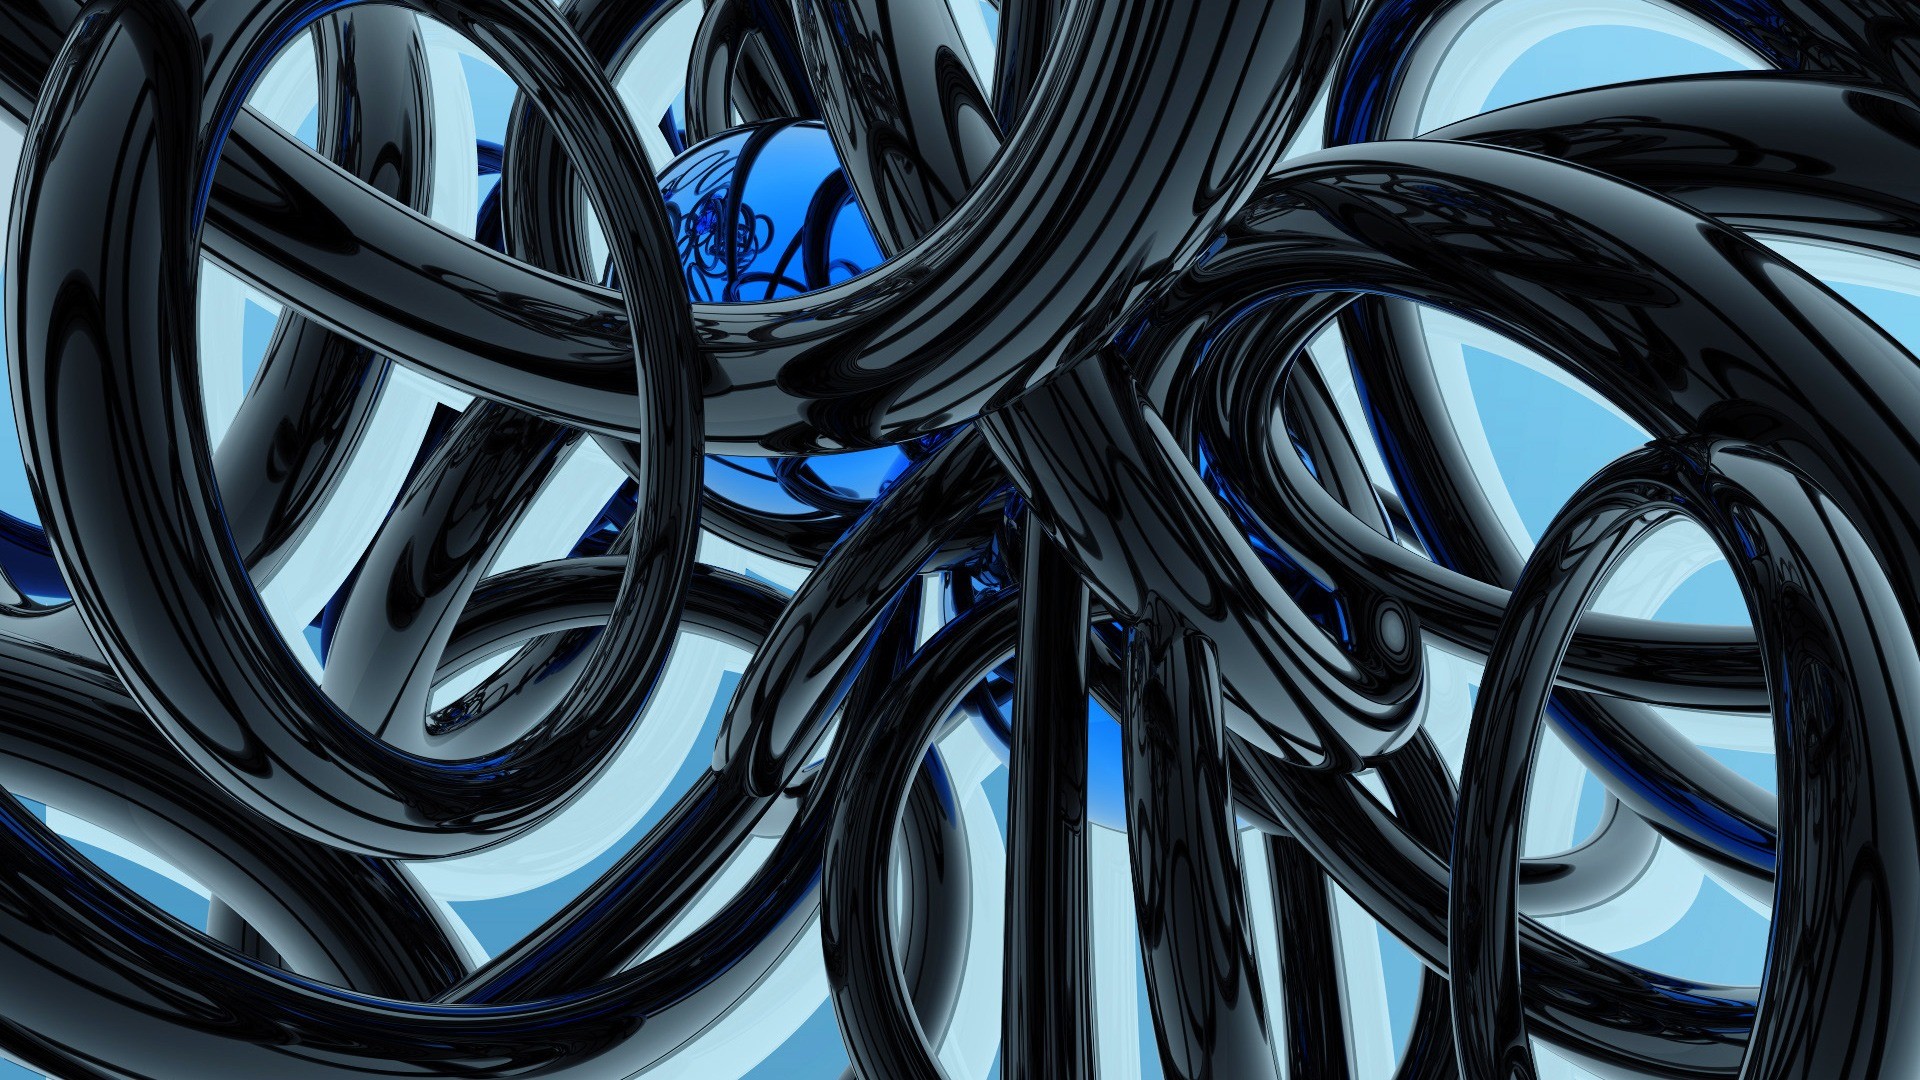 Black and Blue Wallpaper Abstract 3D Wallpapers